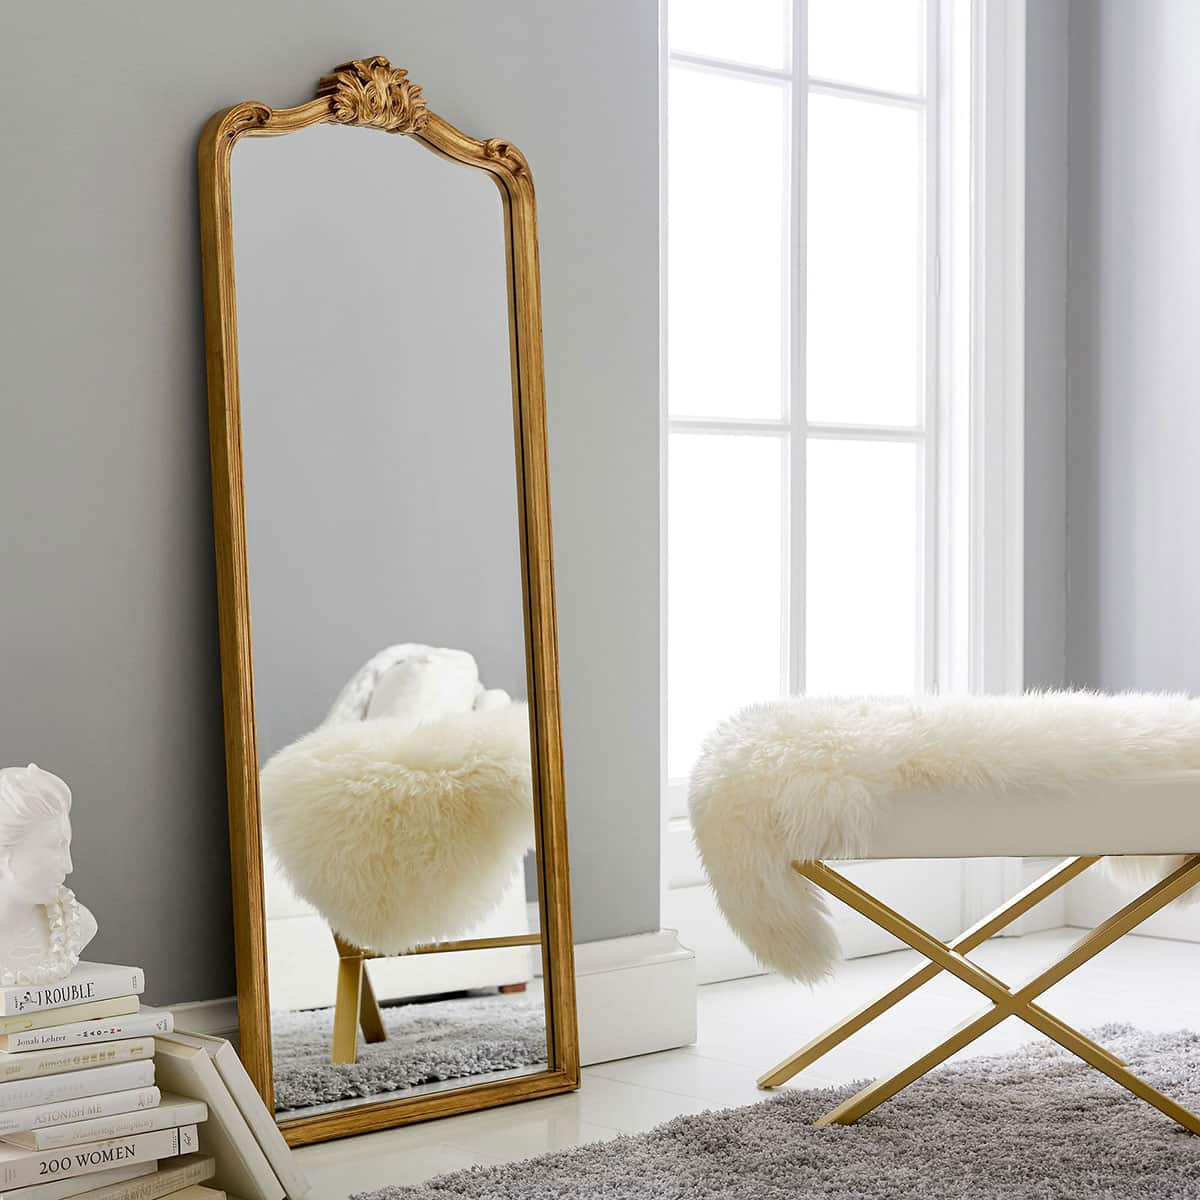 The Best 17 Anthropologie Mirror Dupes - House Of Hipsters